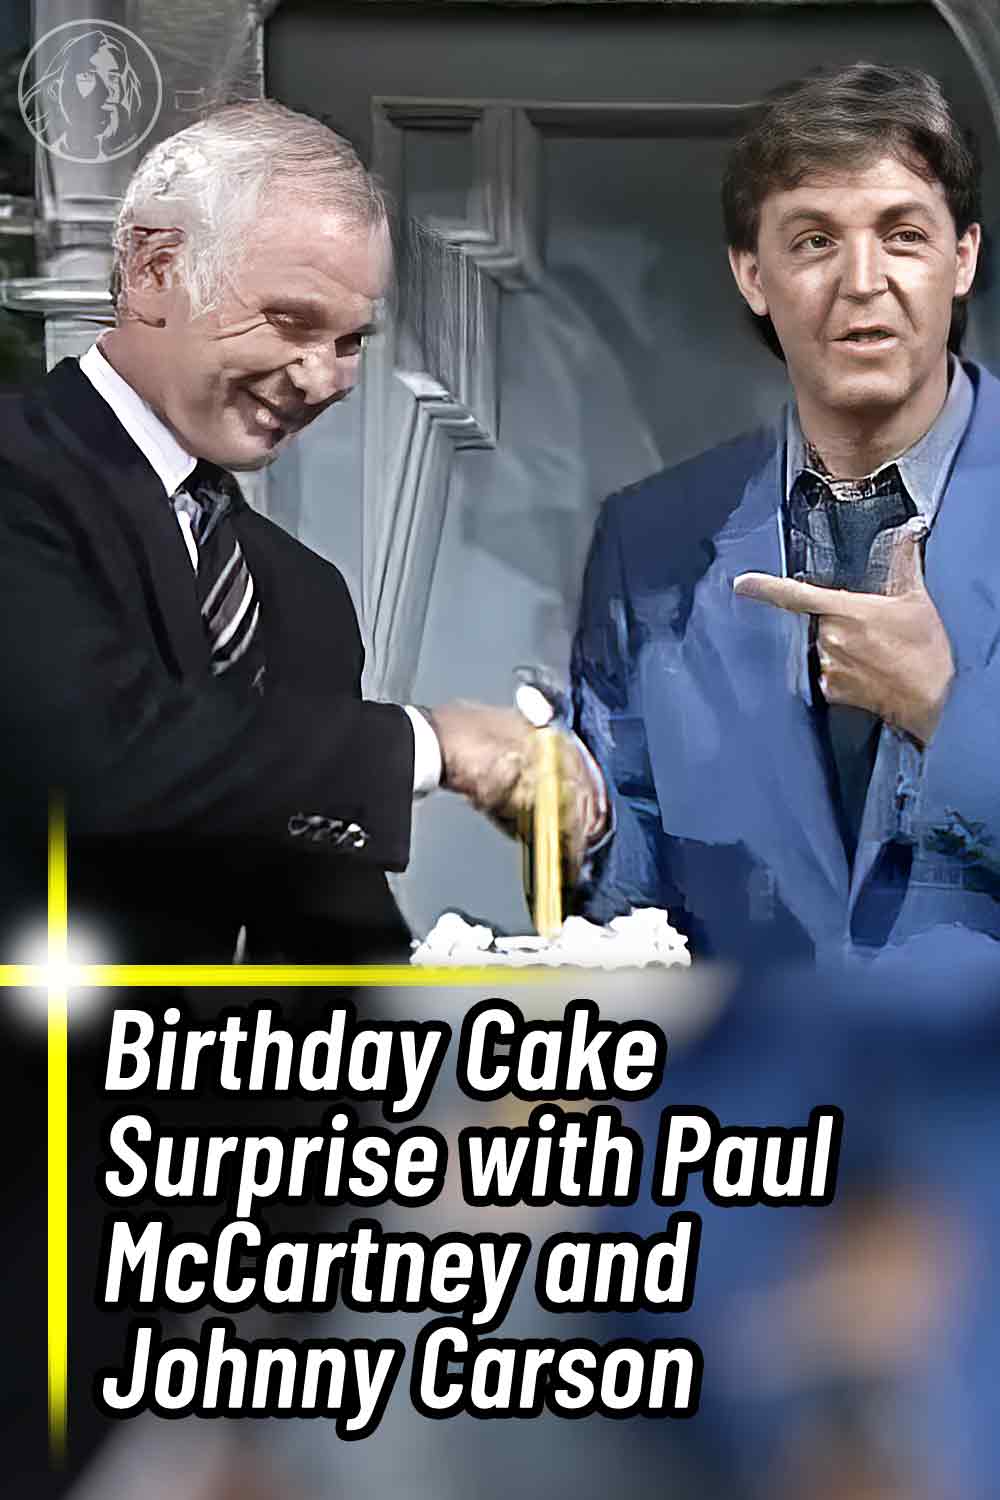 Birthday Cake Surprise with Paul McCartney and Johnny Carson